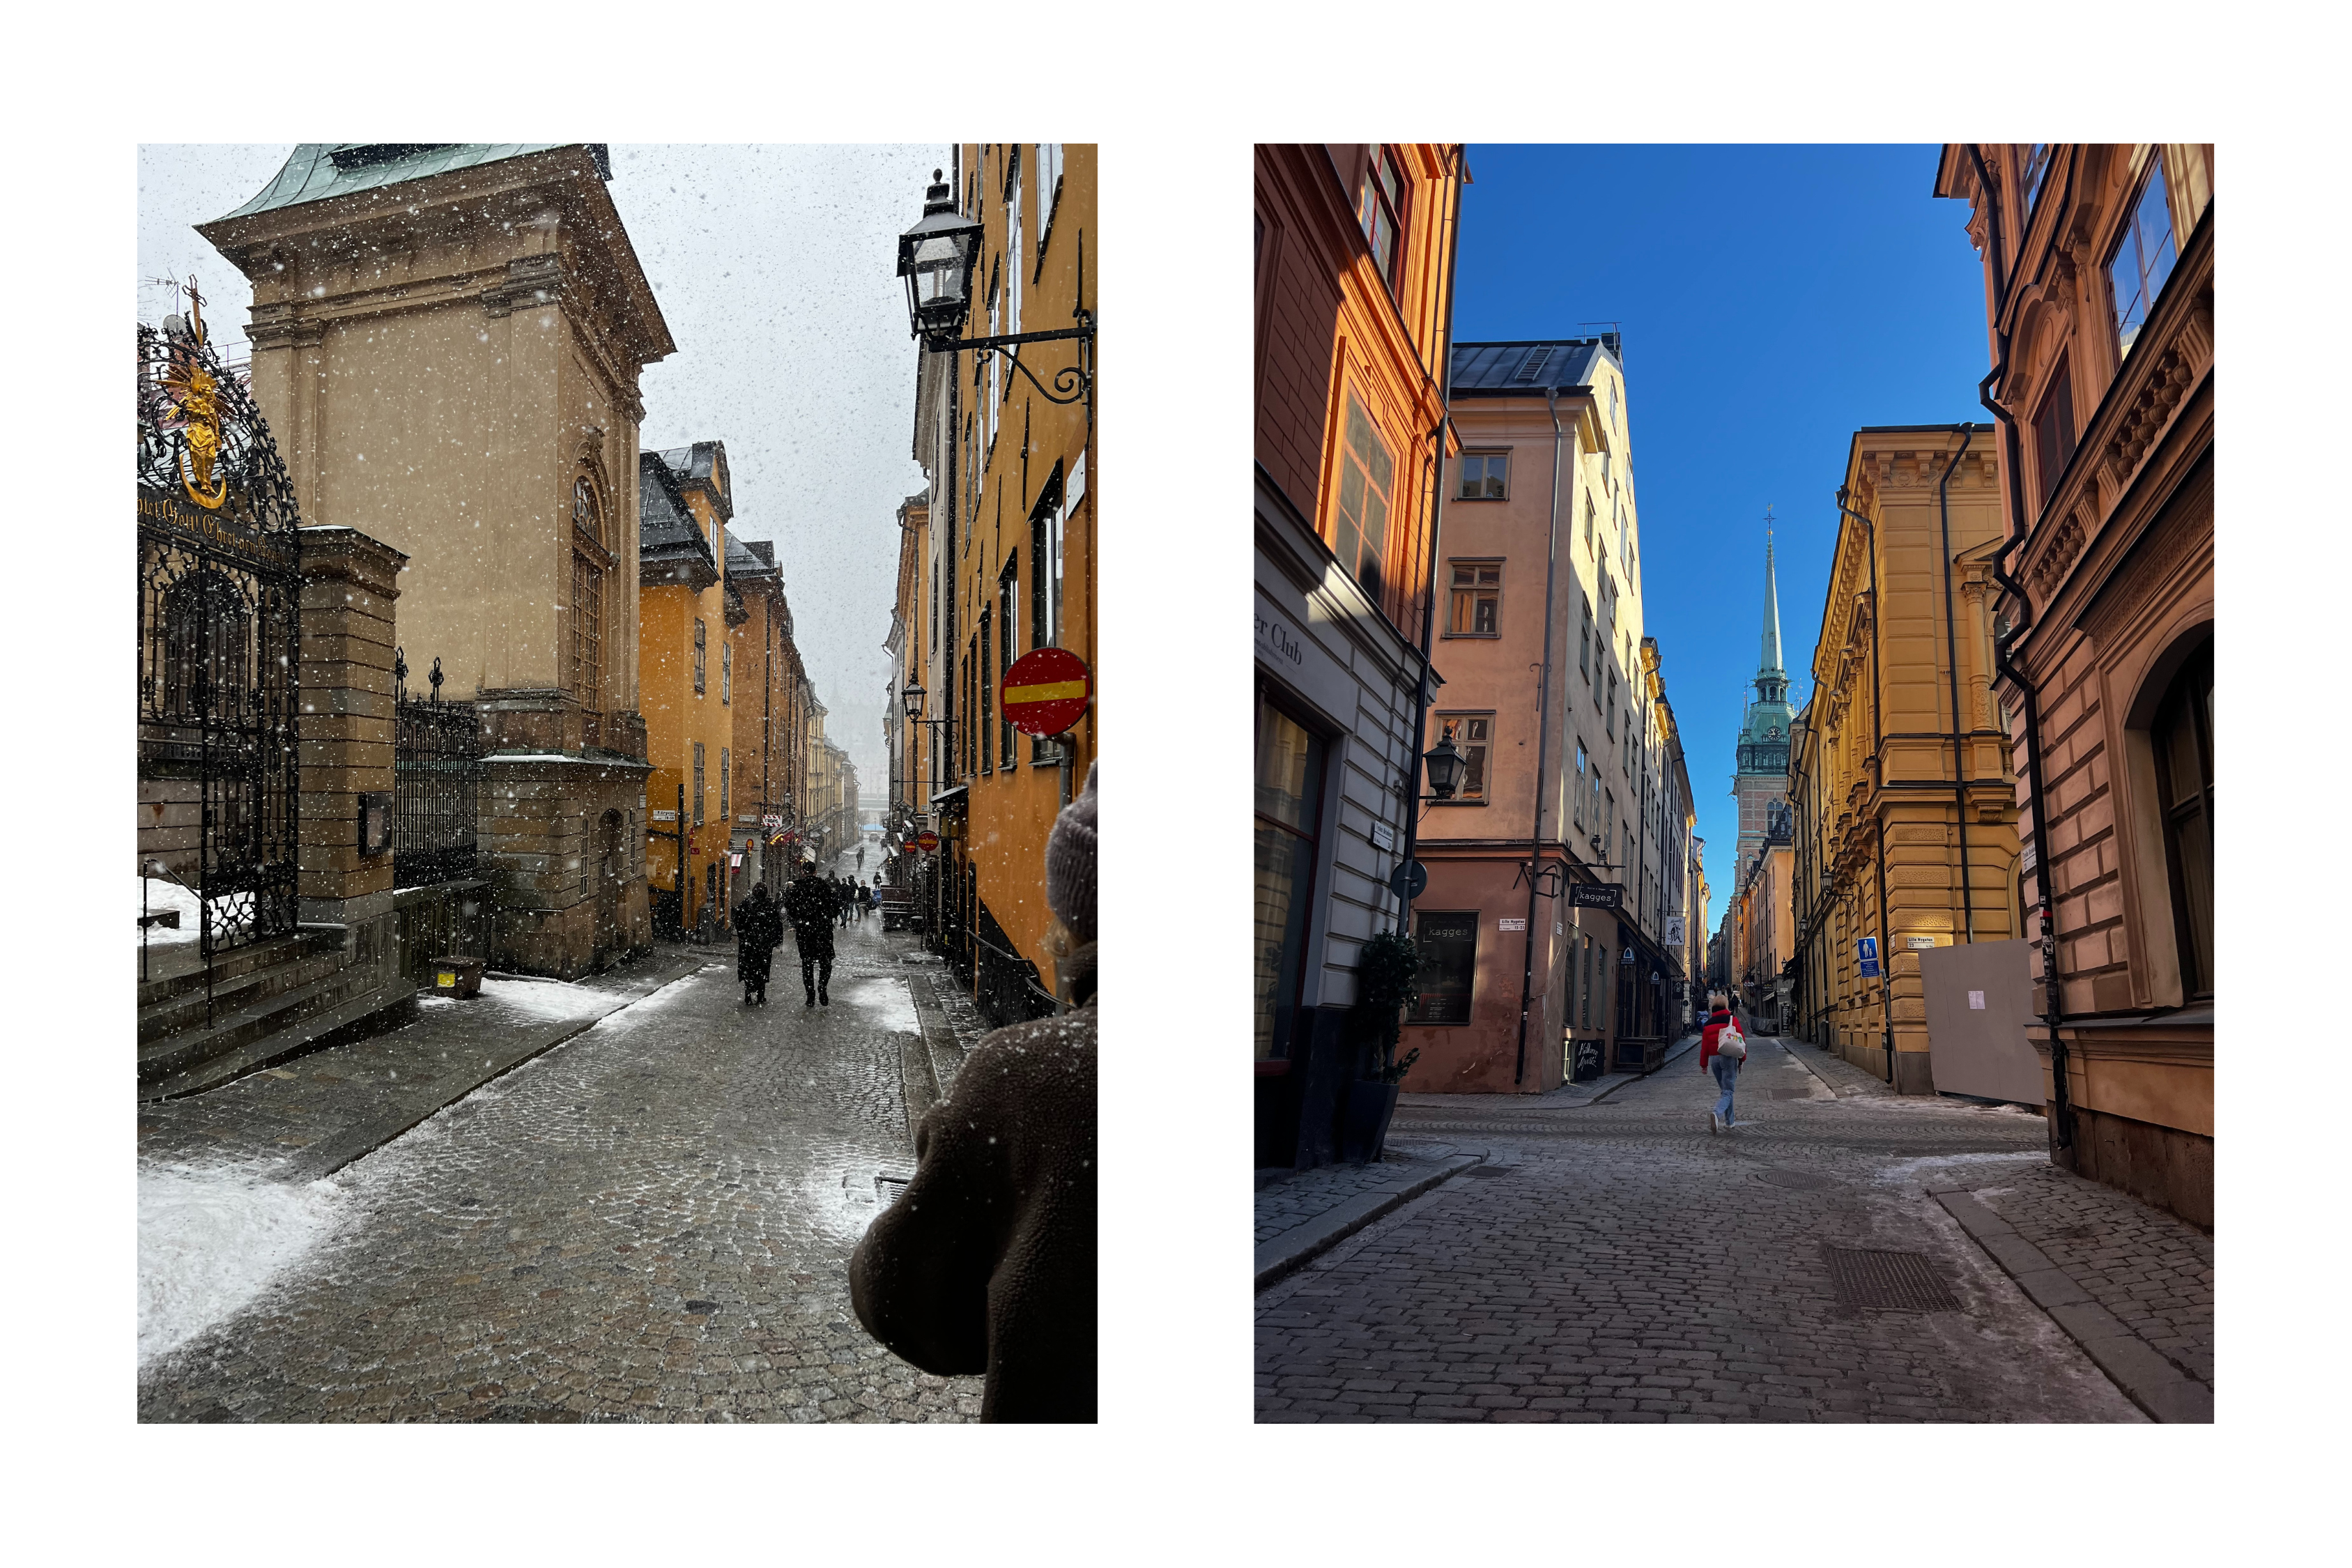 Gamla Stan, “Old Town”, where my office was located